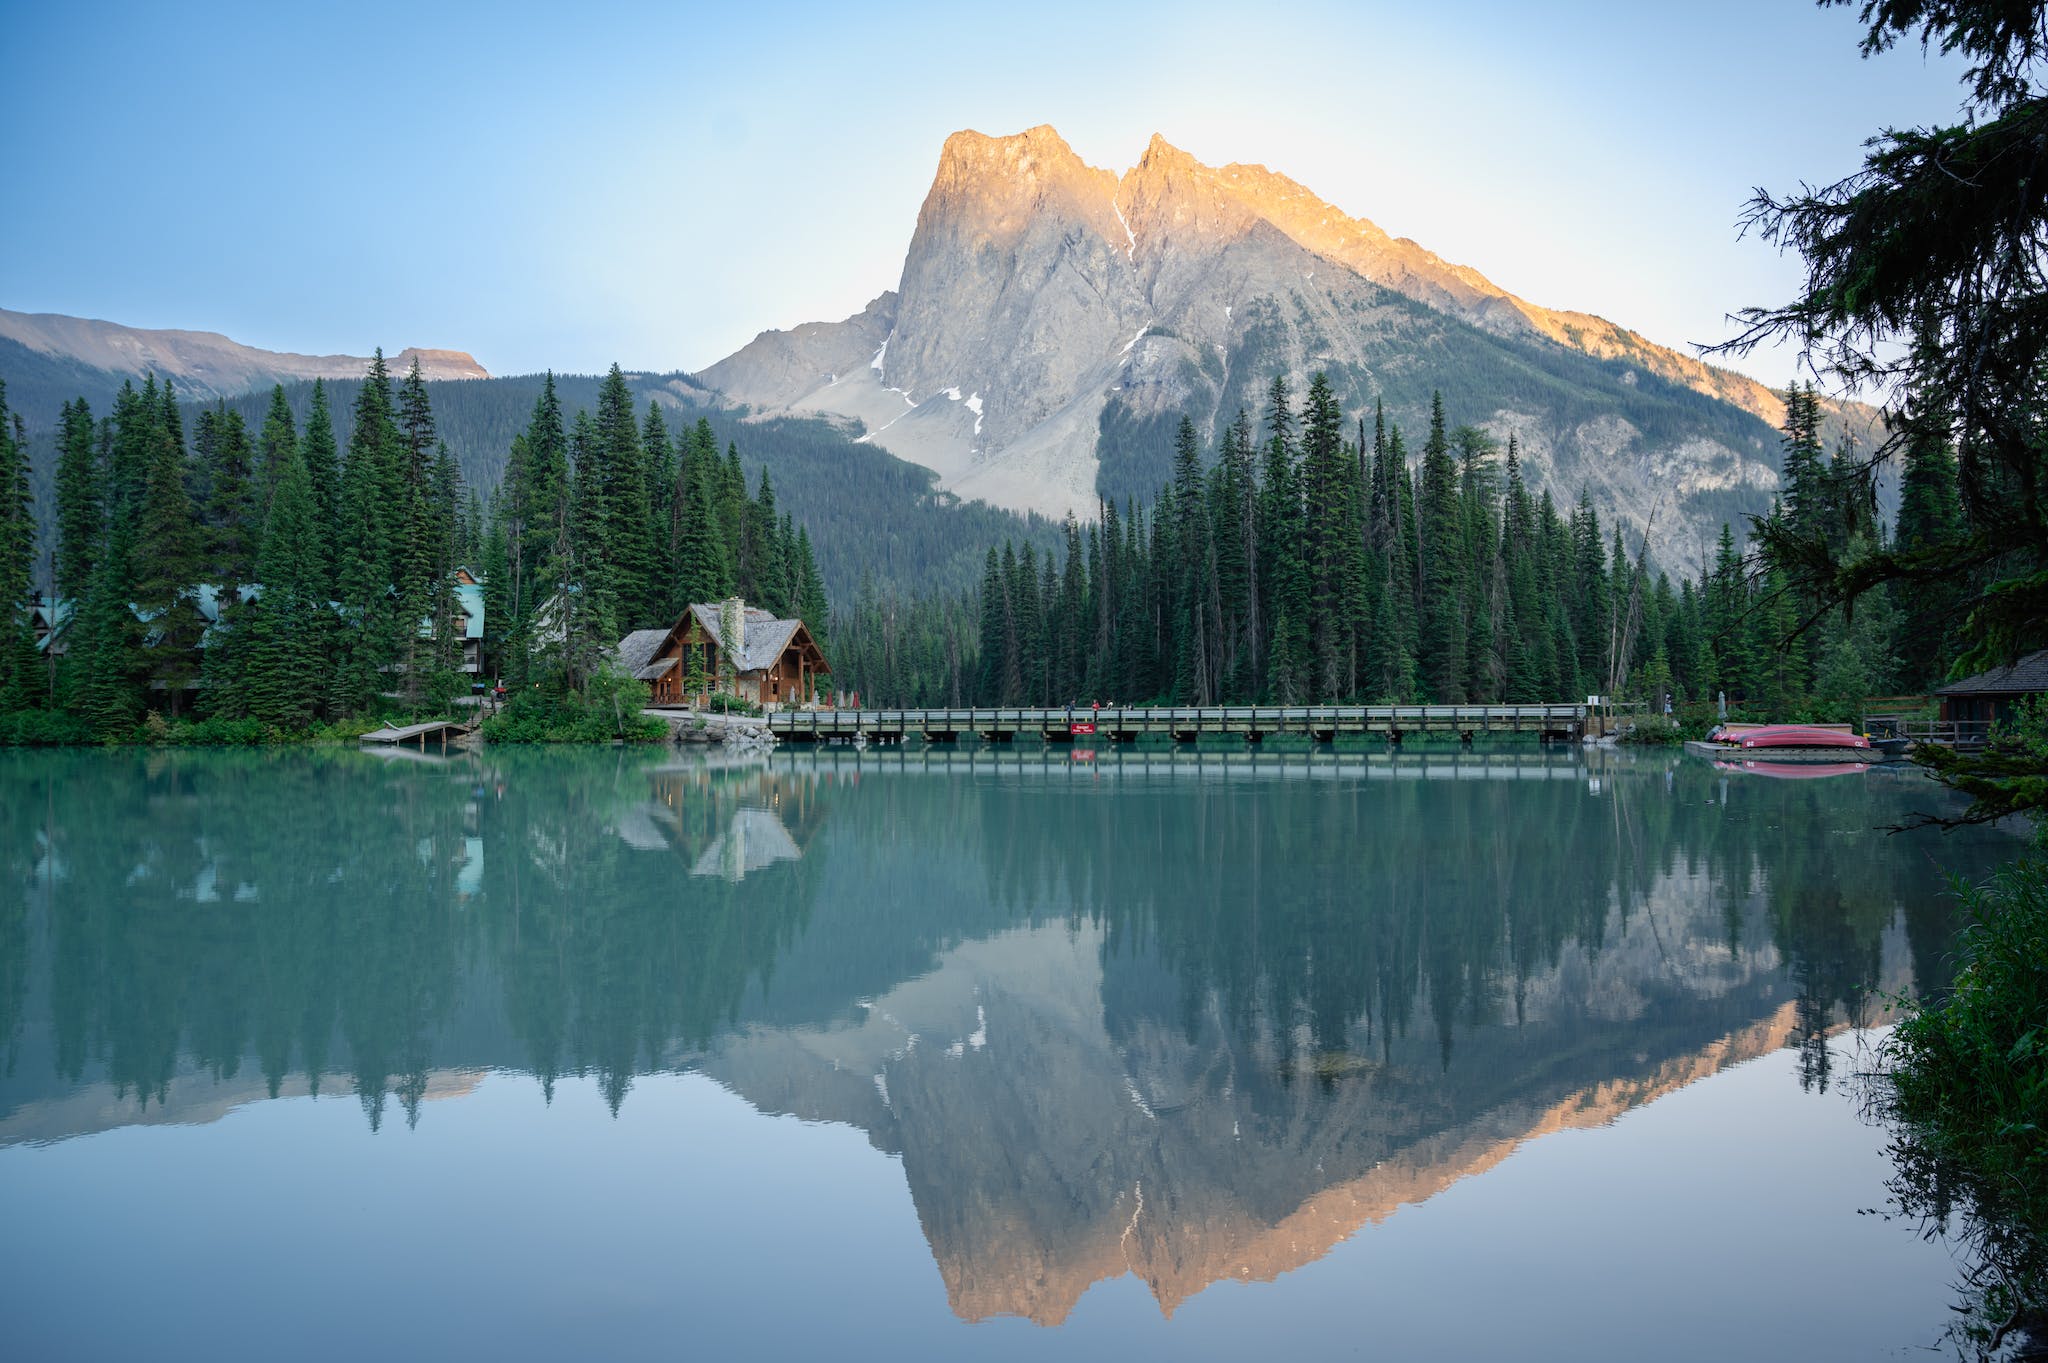 Lodge at the foot of Mount Burgess Reflecting in the Waters of Emerald Lake in Yoho National Park Canada